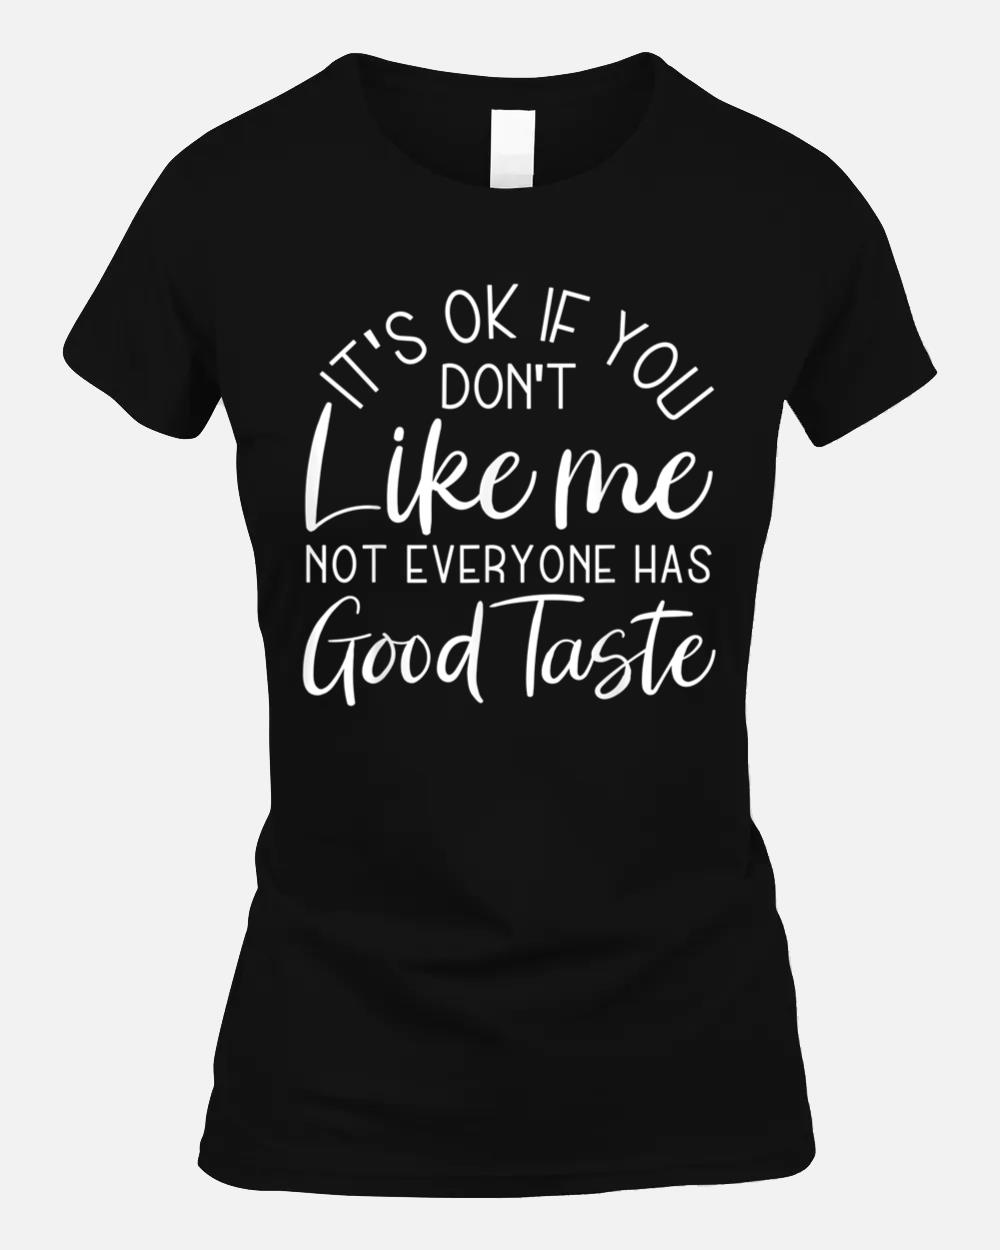 It's Ok If You Don't Like Me Not Everyone Has Good Taste Unisex T-Shirt